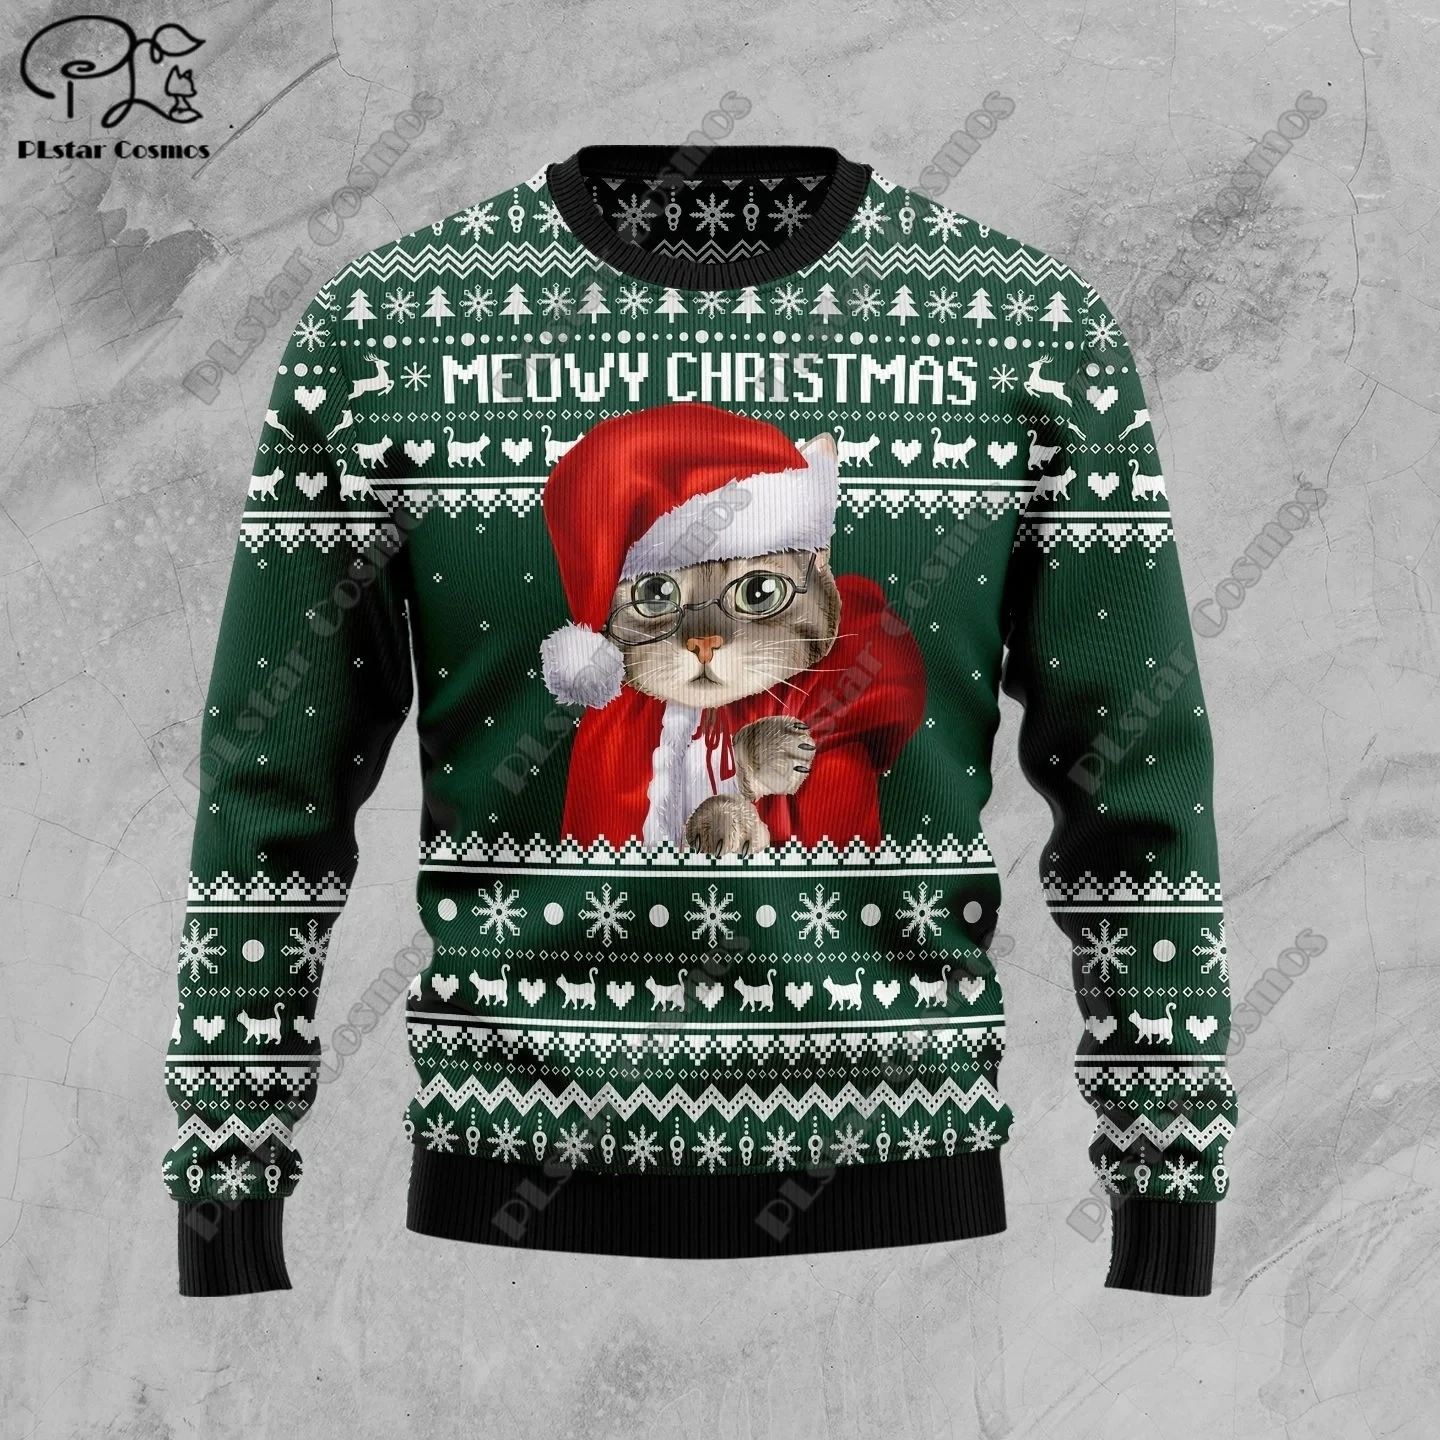 plstar cosmos new 3d printed christmas series pattern ugly sweater street casual winter sweater s 2 New 3D printed Christmas elements Christmas tree Santa Claus pattern art print ugly sweater street casual winter sweater S-3